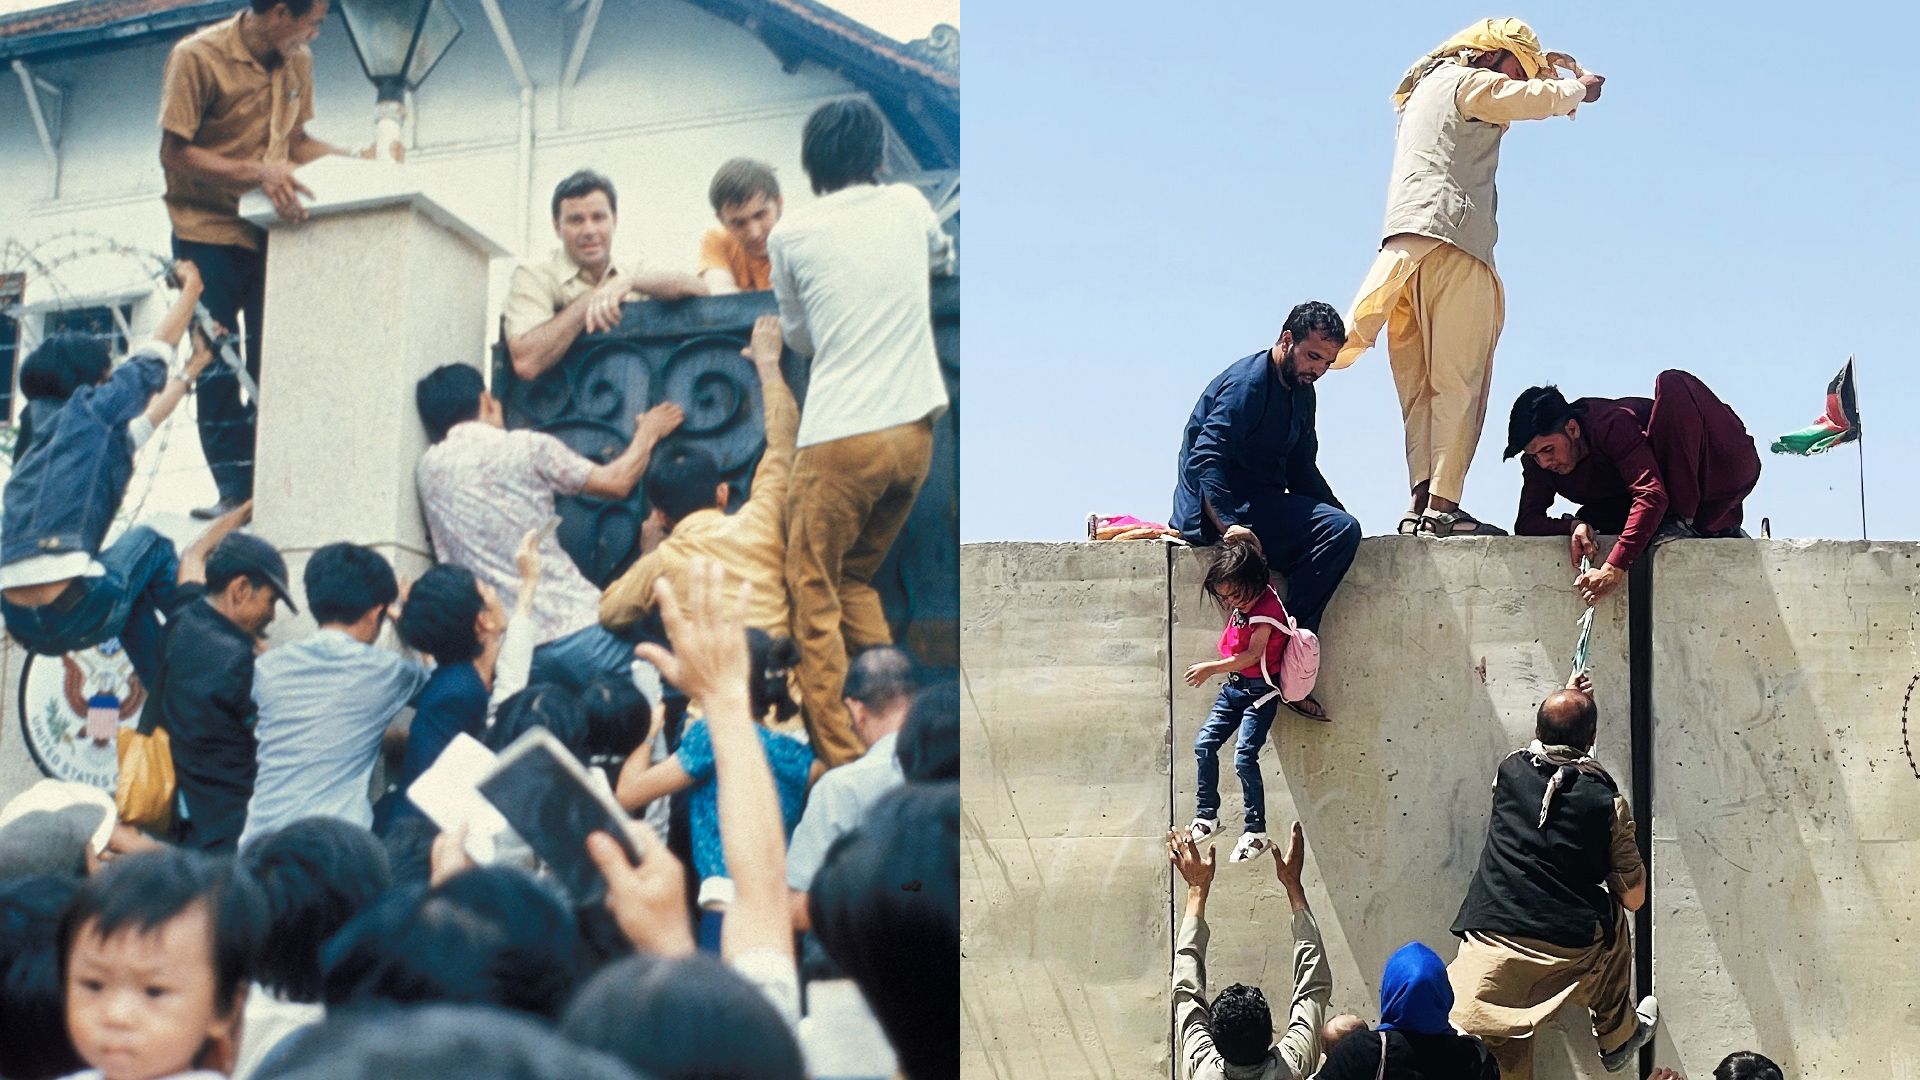 Side by side photos from the Vietnam and Afghanistan wars, showing people climbing over walls trying to escape.